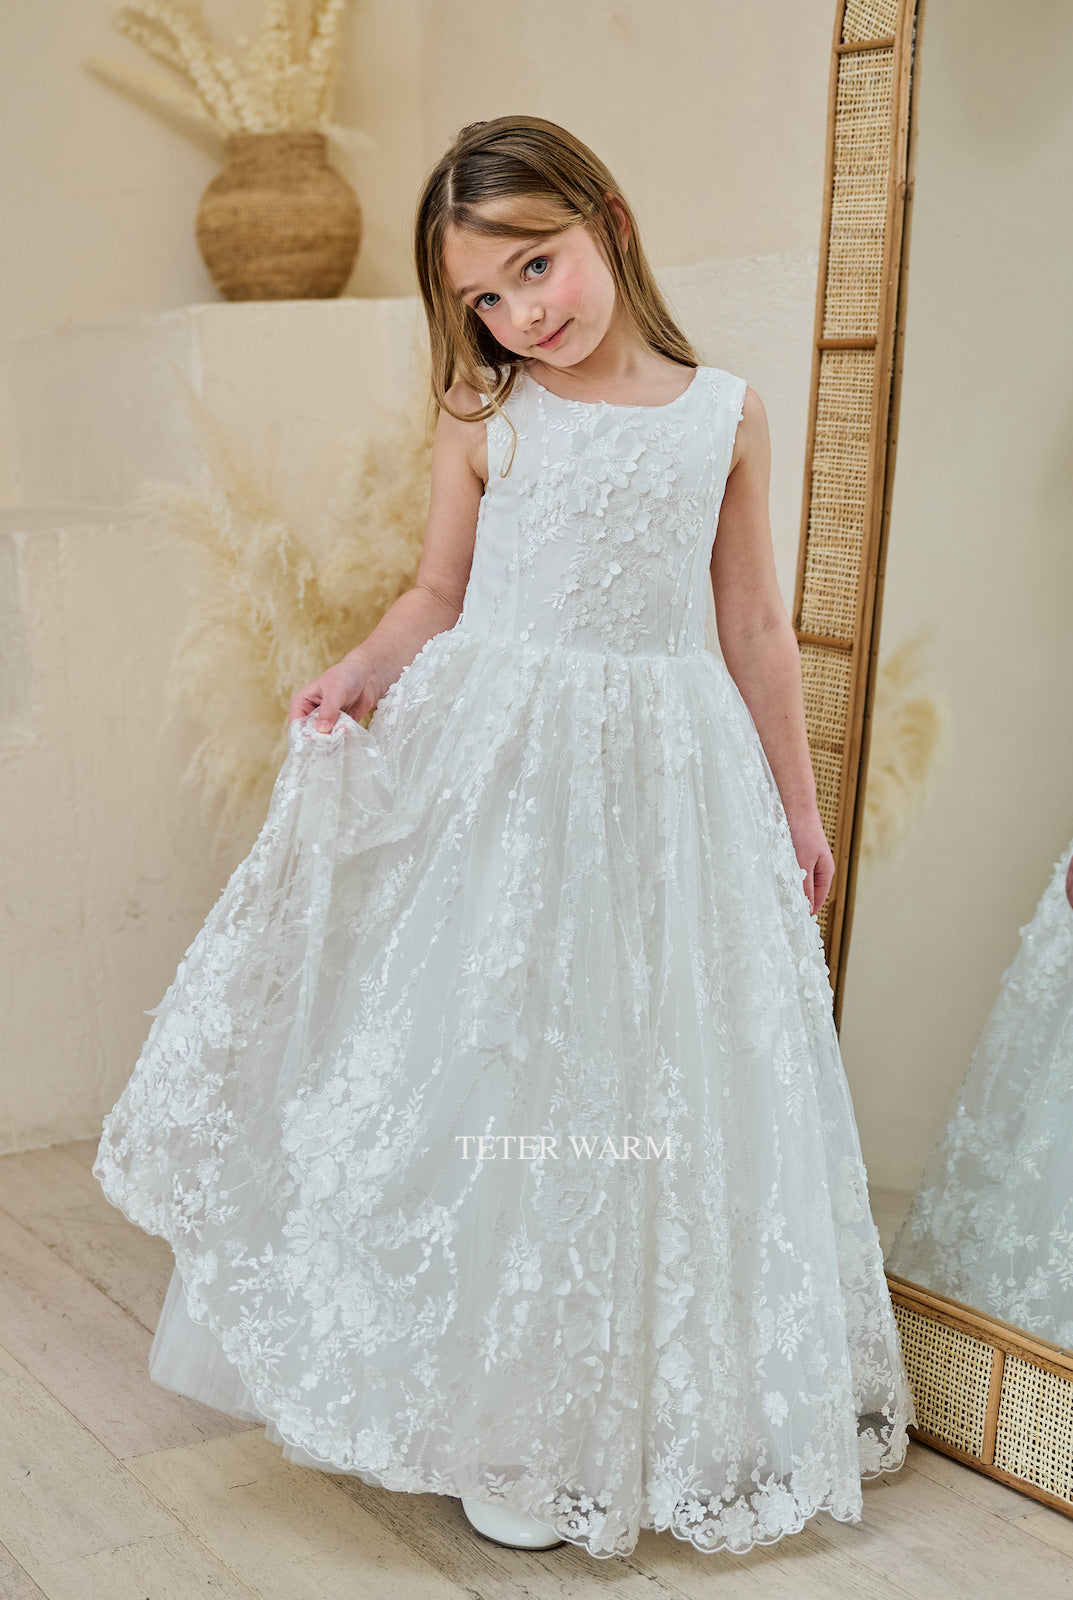 Teter Warm All Lace Sleeveless Tulle Communion Dress (Size 5, 6, 7, 8, 10)